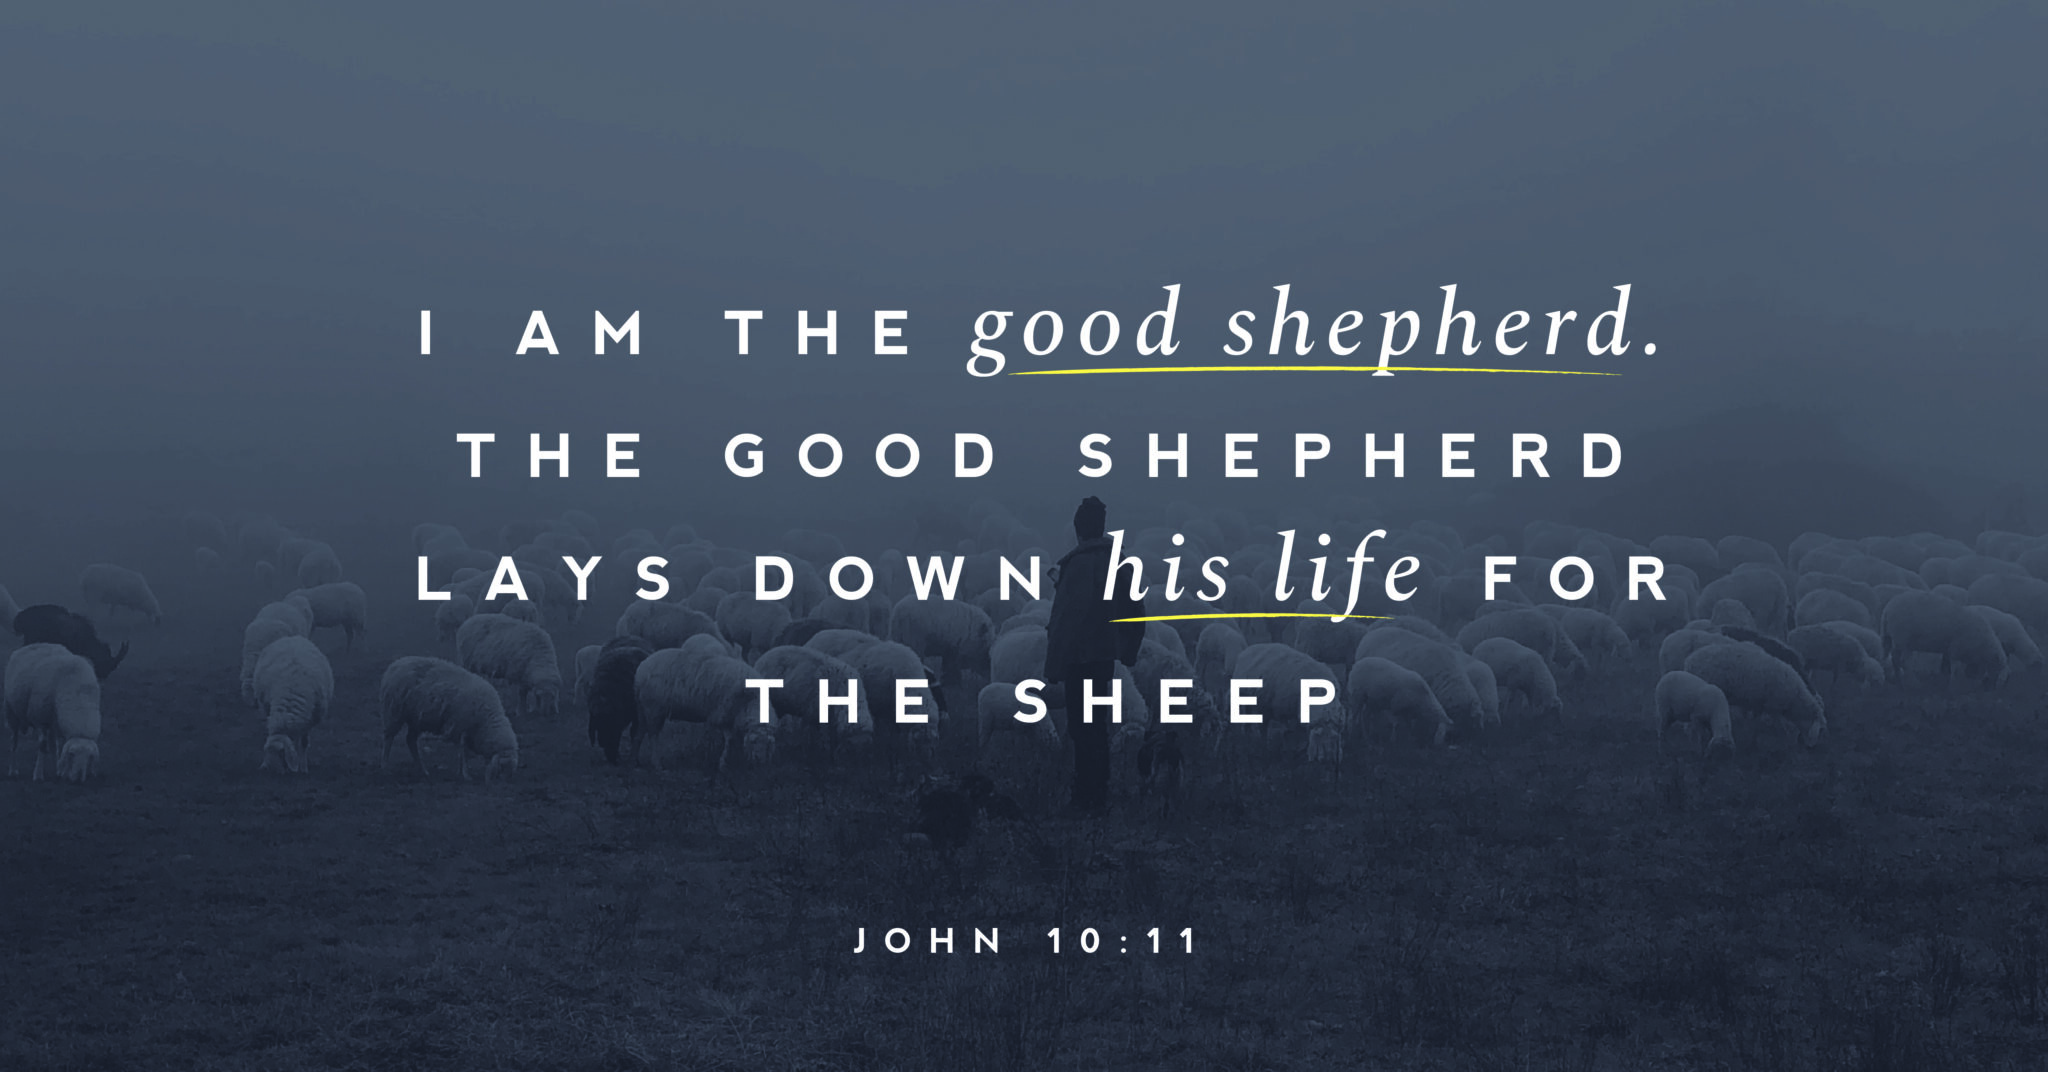 A picture of sheep with text overtop that reads, "I am the good shephered. THe good shepherd lays down his life for the sheep" (John 10:11).